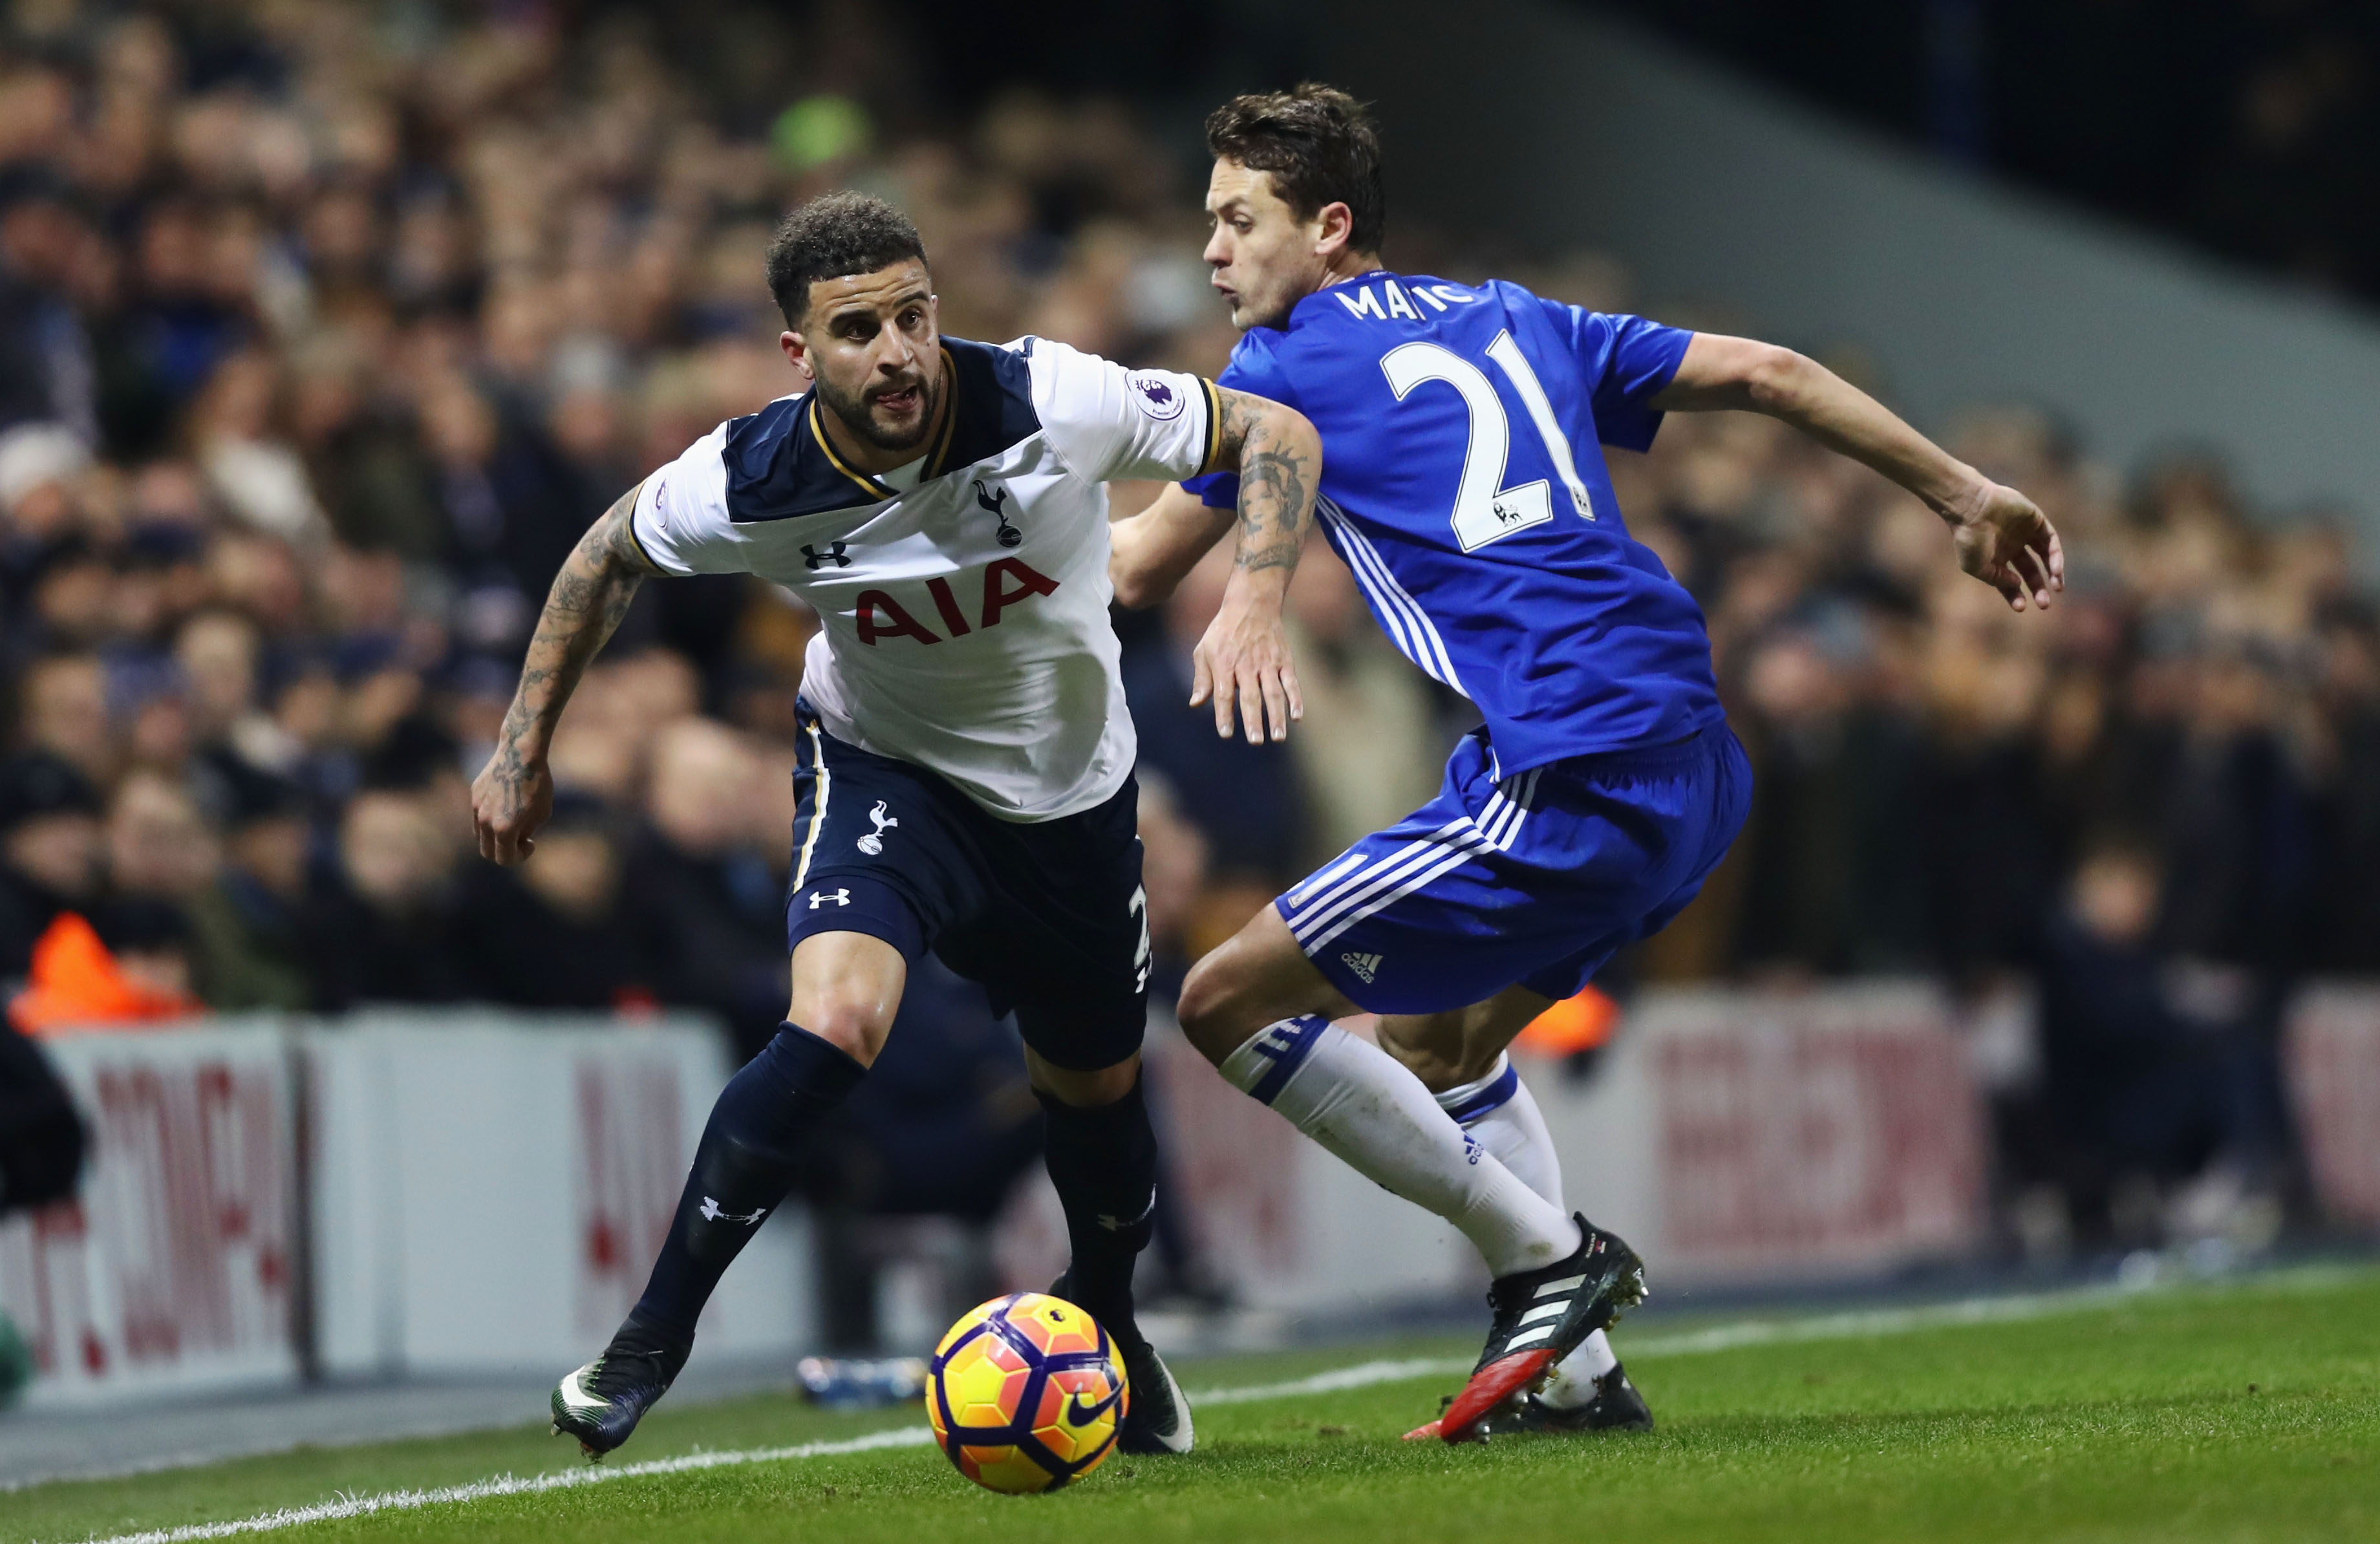 LONDON, ENGLAND - JANUARY 04: Kyle Walker of Tottenham Hotspur (L) takes the ball past Nemanja Matic of Chelsea (R) during the Premier League match between Tottenham Hotspur and Chelsea at White Hart Lane on January 4, 2017 in London, England. (Photo by Clive Rose/Getty Images)